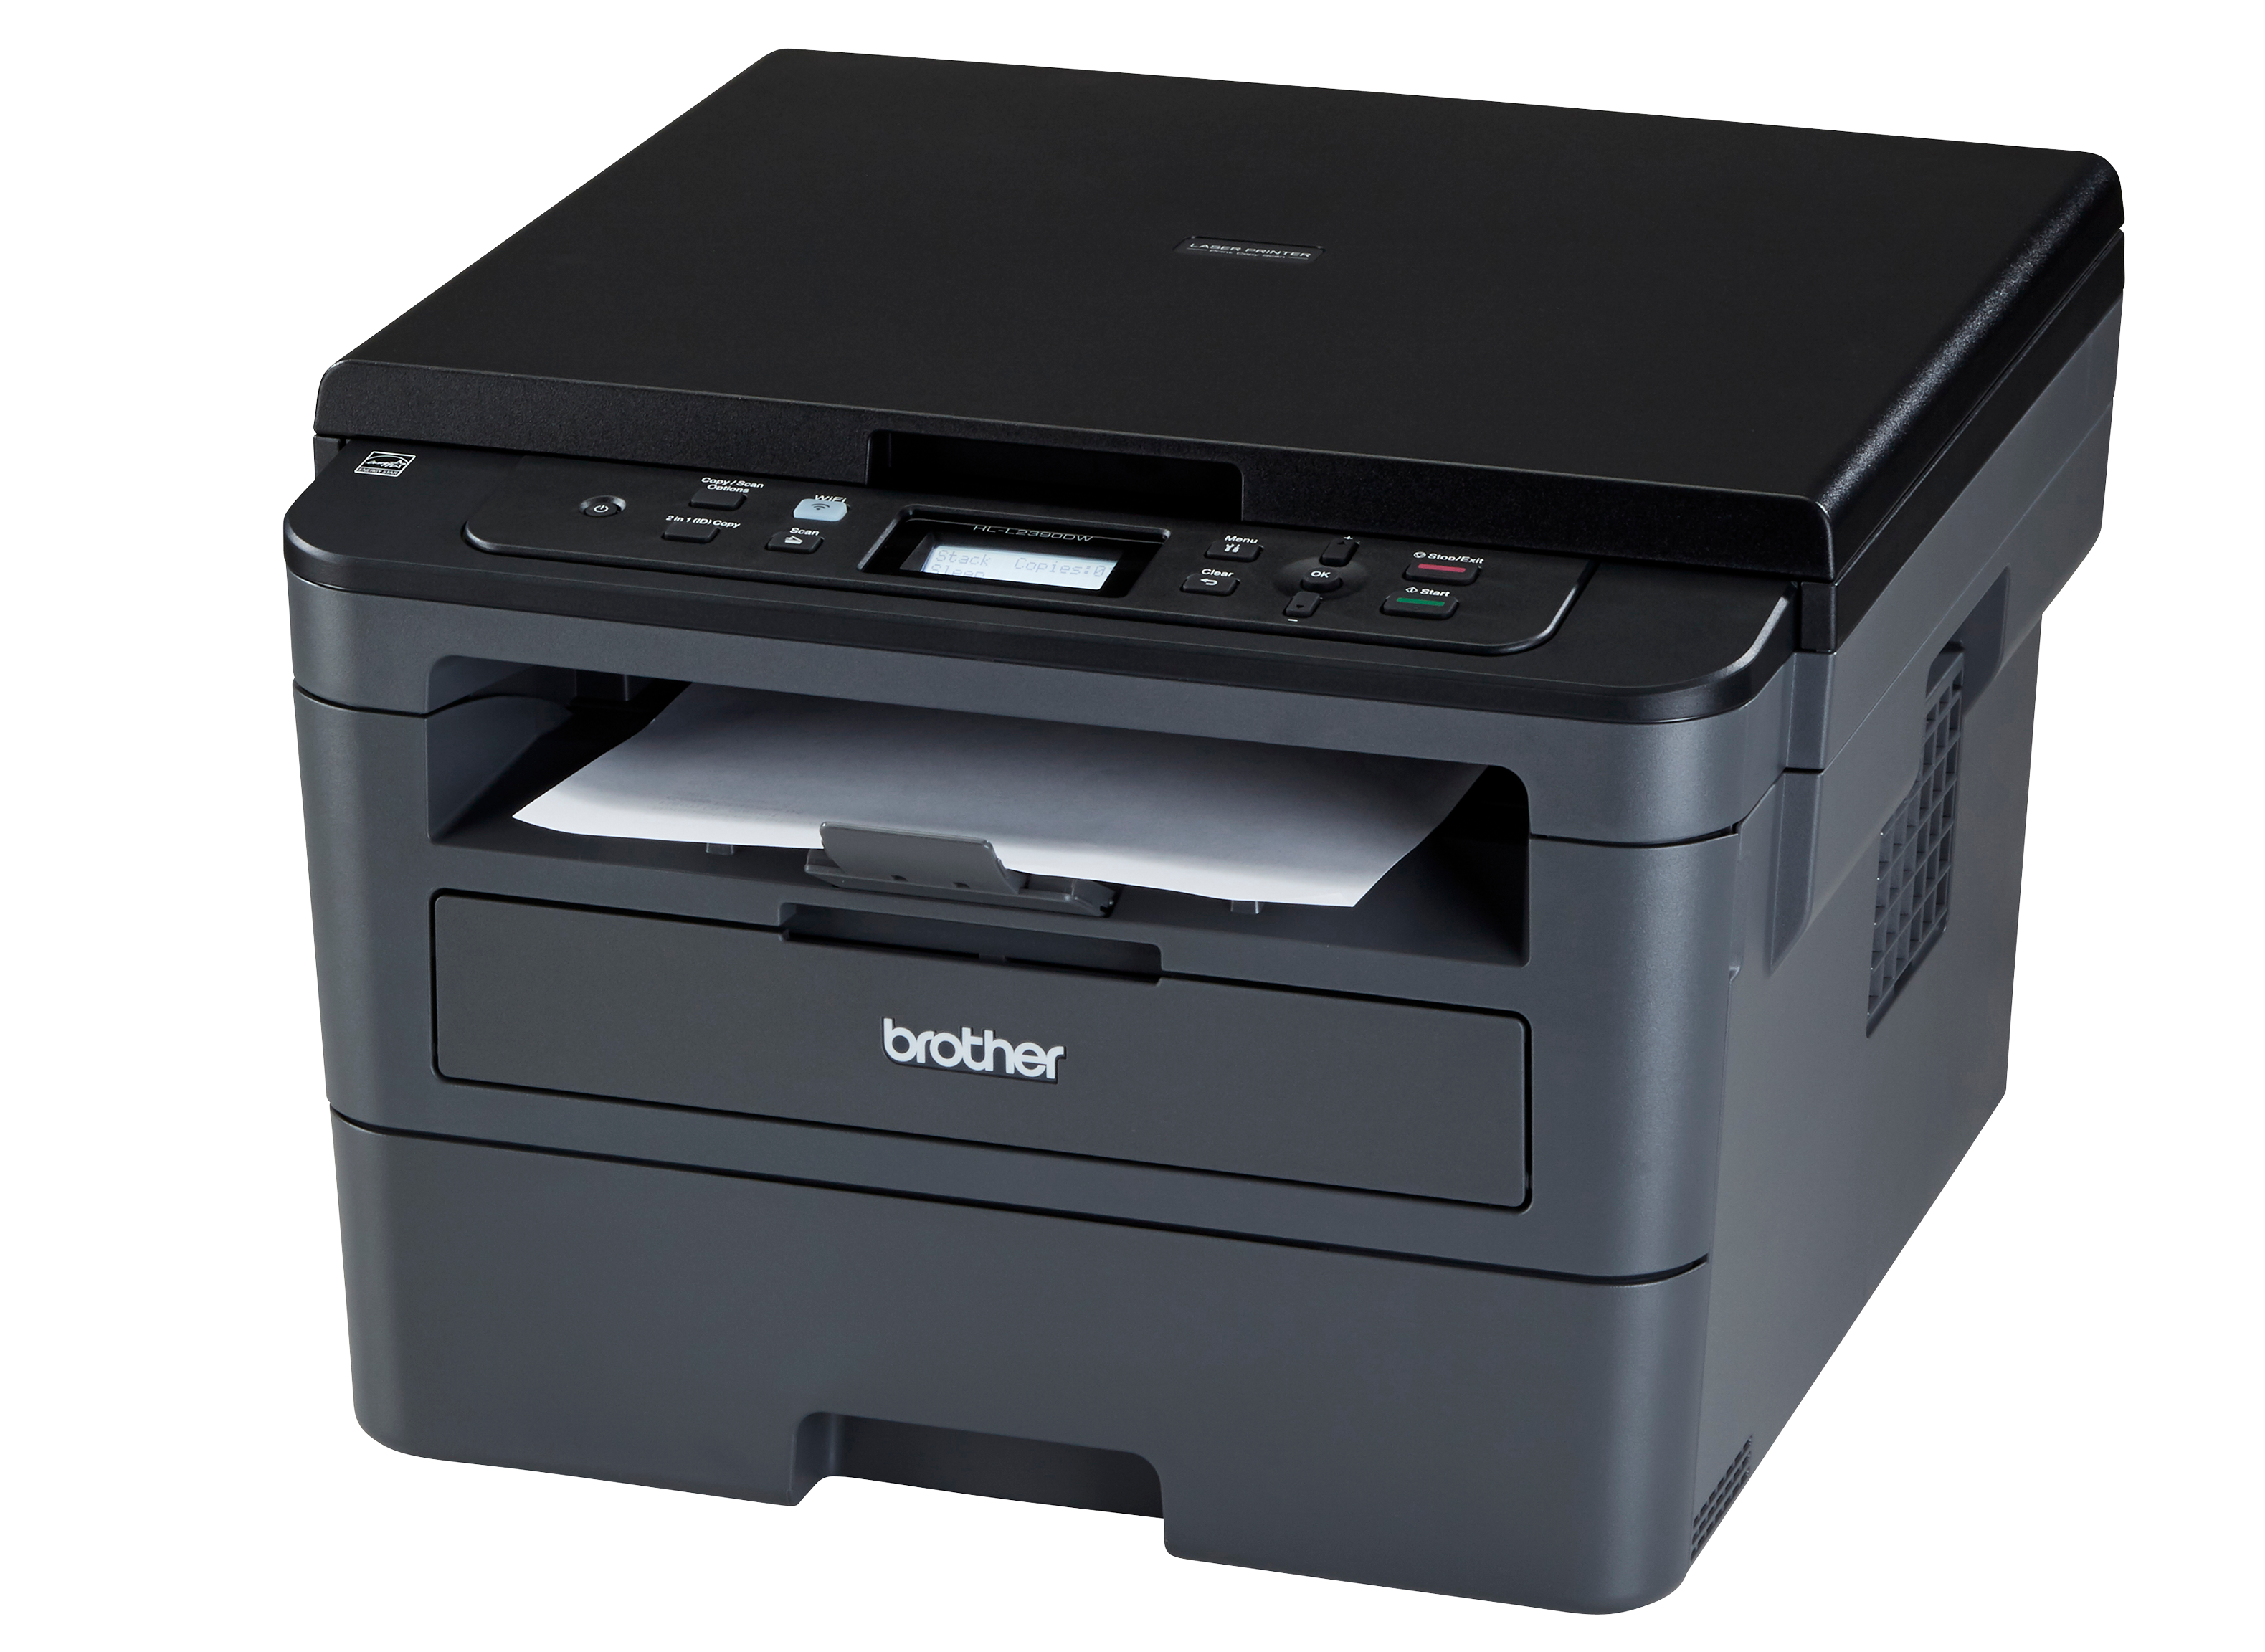 https://crdms.images.consumerreports.org/prod/products/cr/models/396532-all-in-one-black-and-white-laser-printers-brother-hl-l2390dw-10001331.png